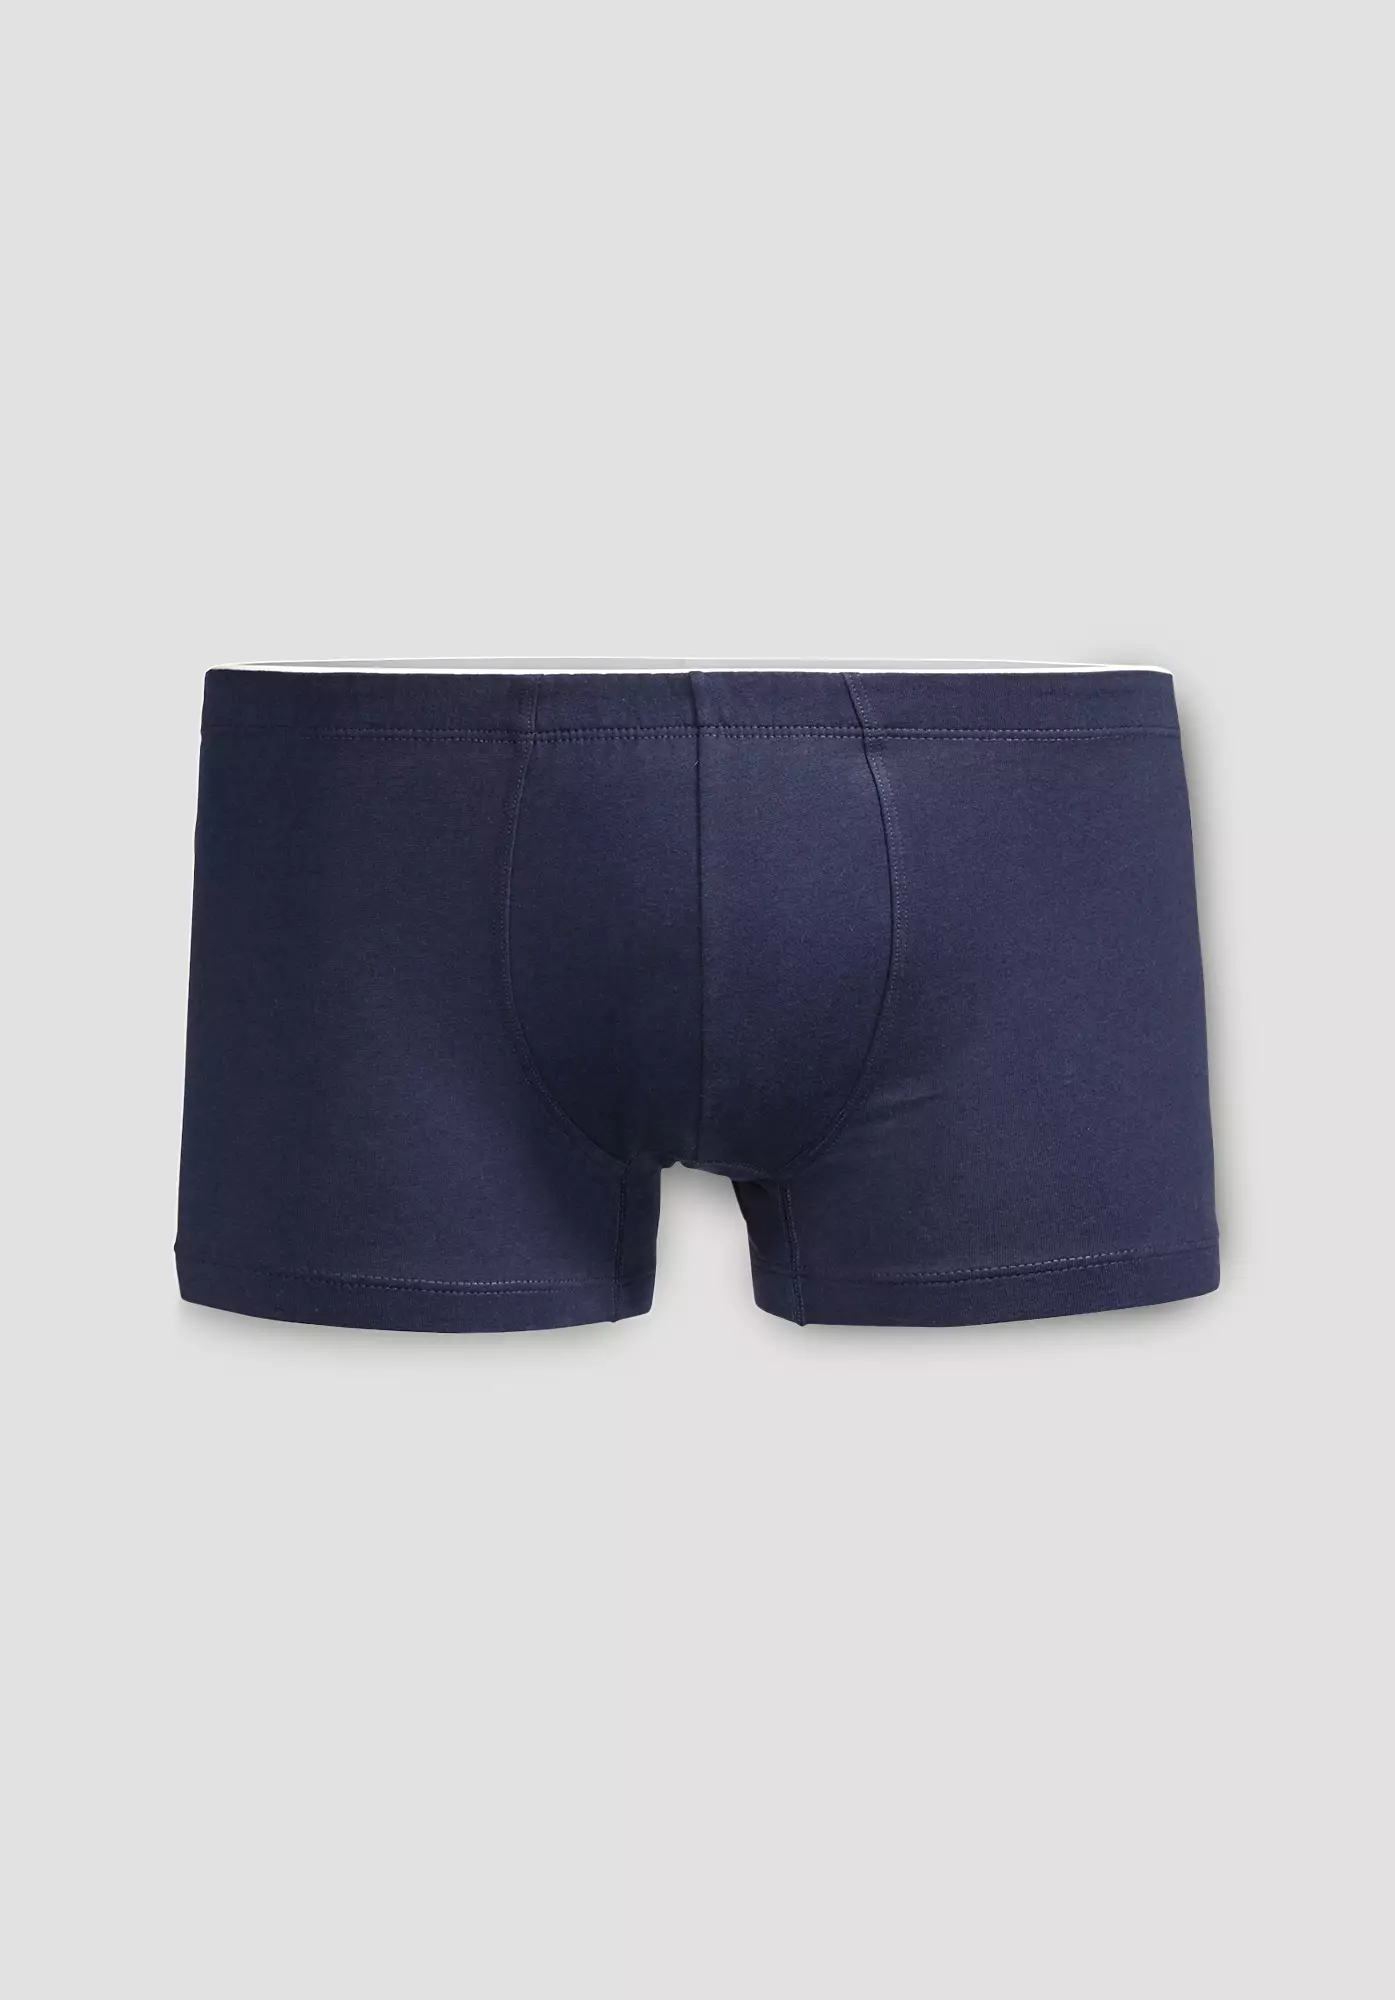 PureLUX pants in a set of 2 made of organic cotton - 2